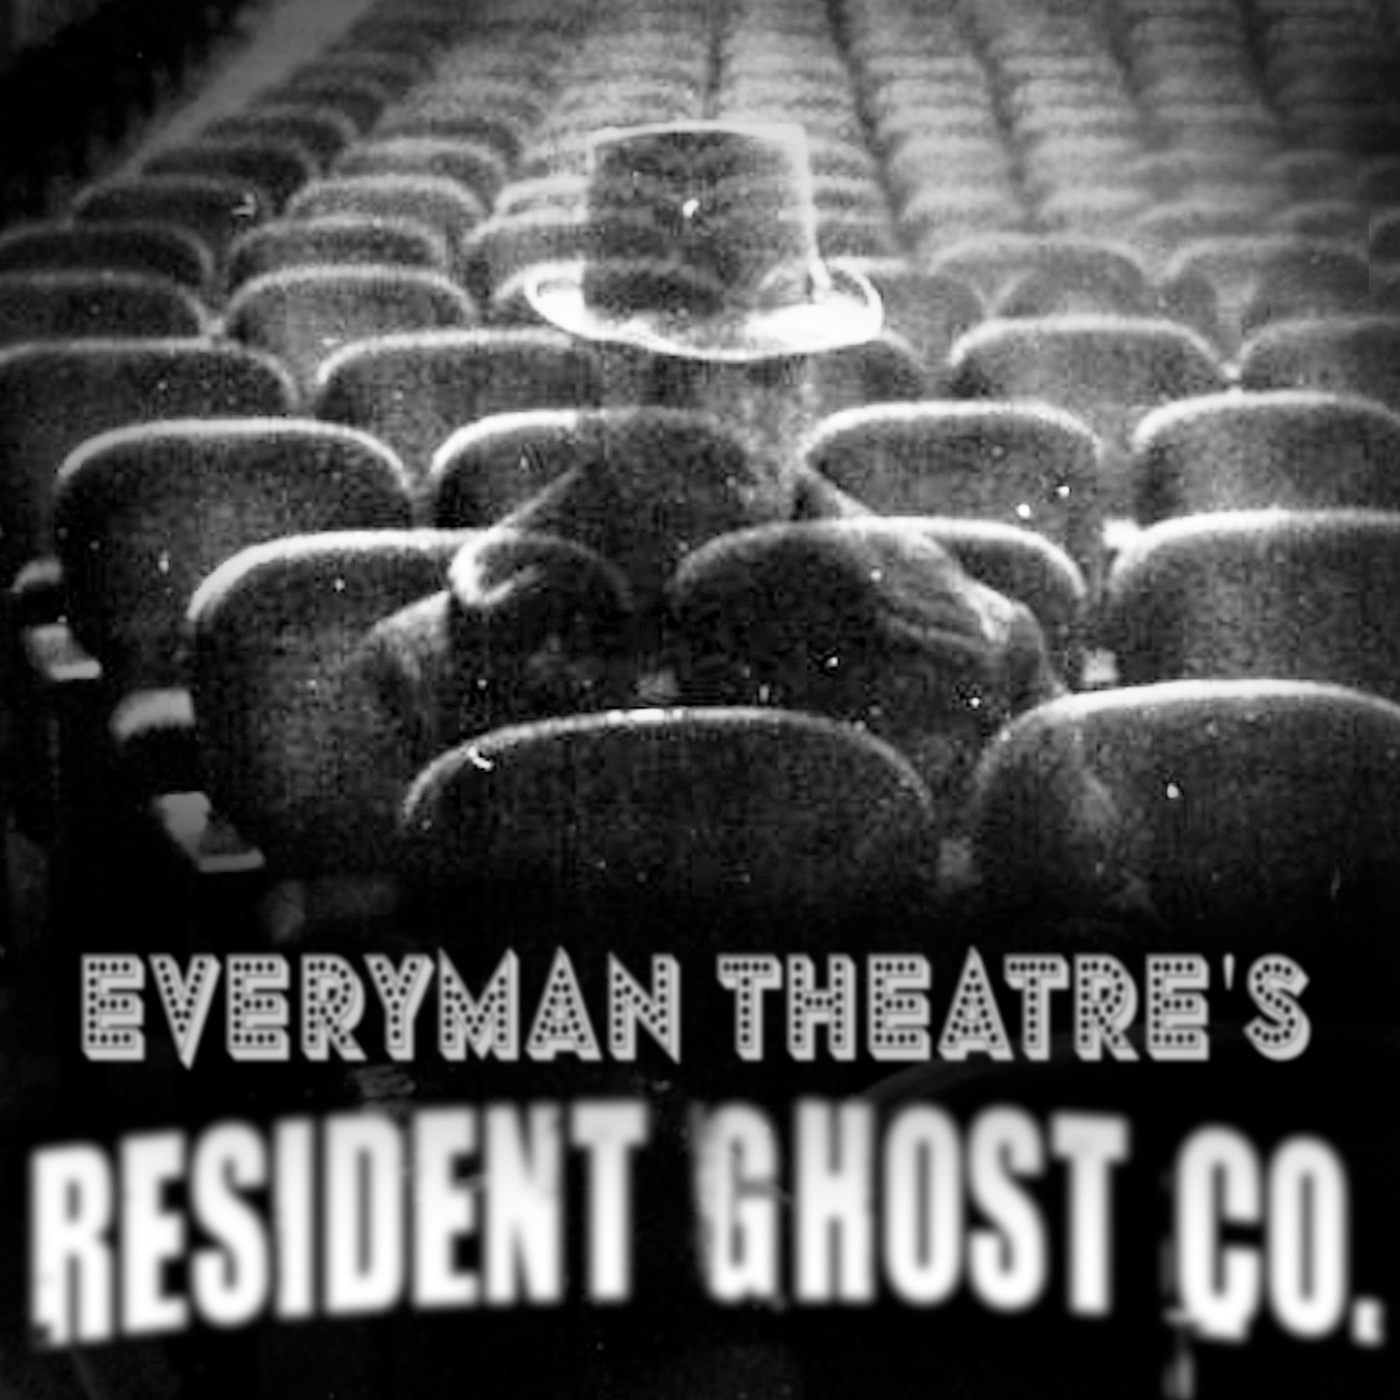 Everyman Theatre’s Resident Ghost Company